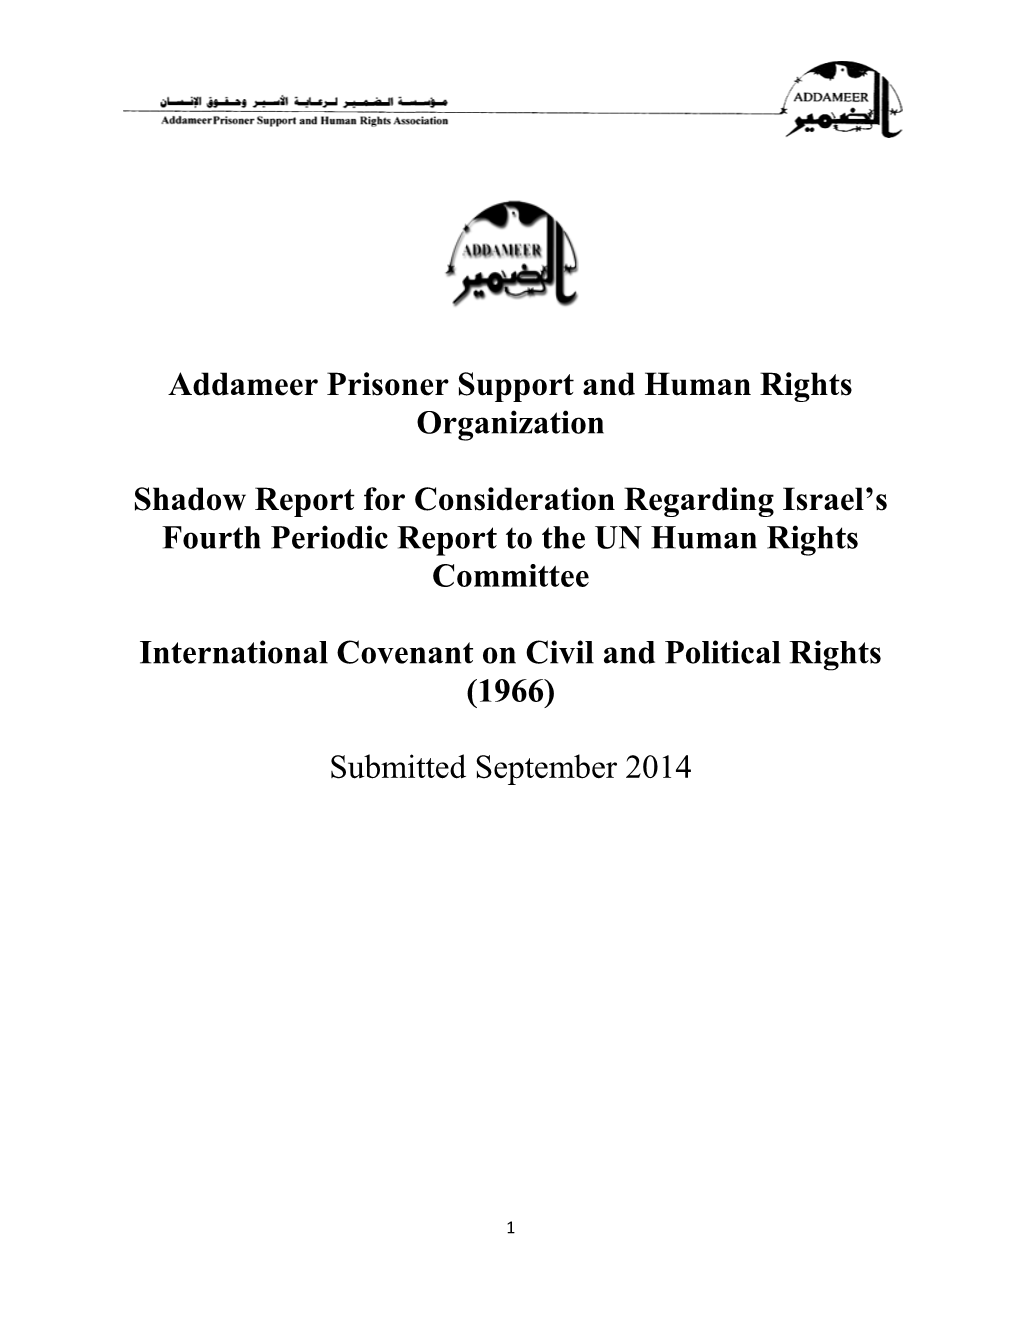 Addameer Prisoner Support and Human Rights Organization